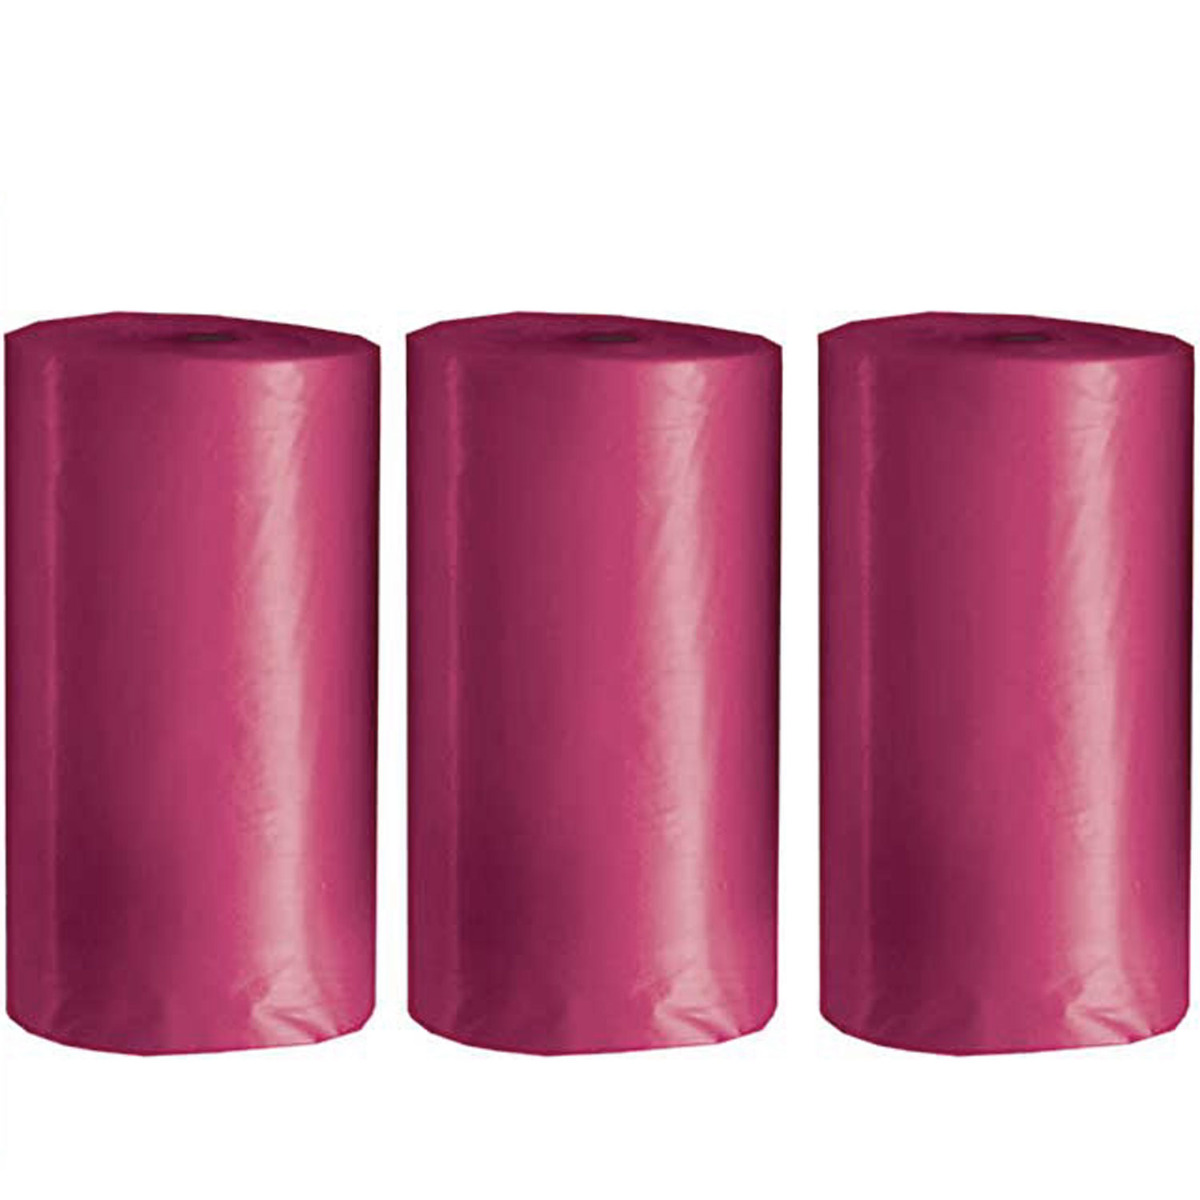 Dog excrement bags in a pack of 3 - biodegradable bags for the cackle in pink for your dog excrement bag dispenser